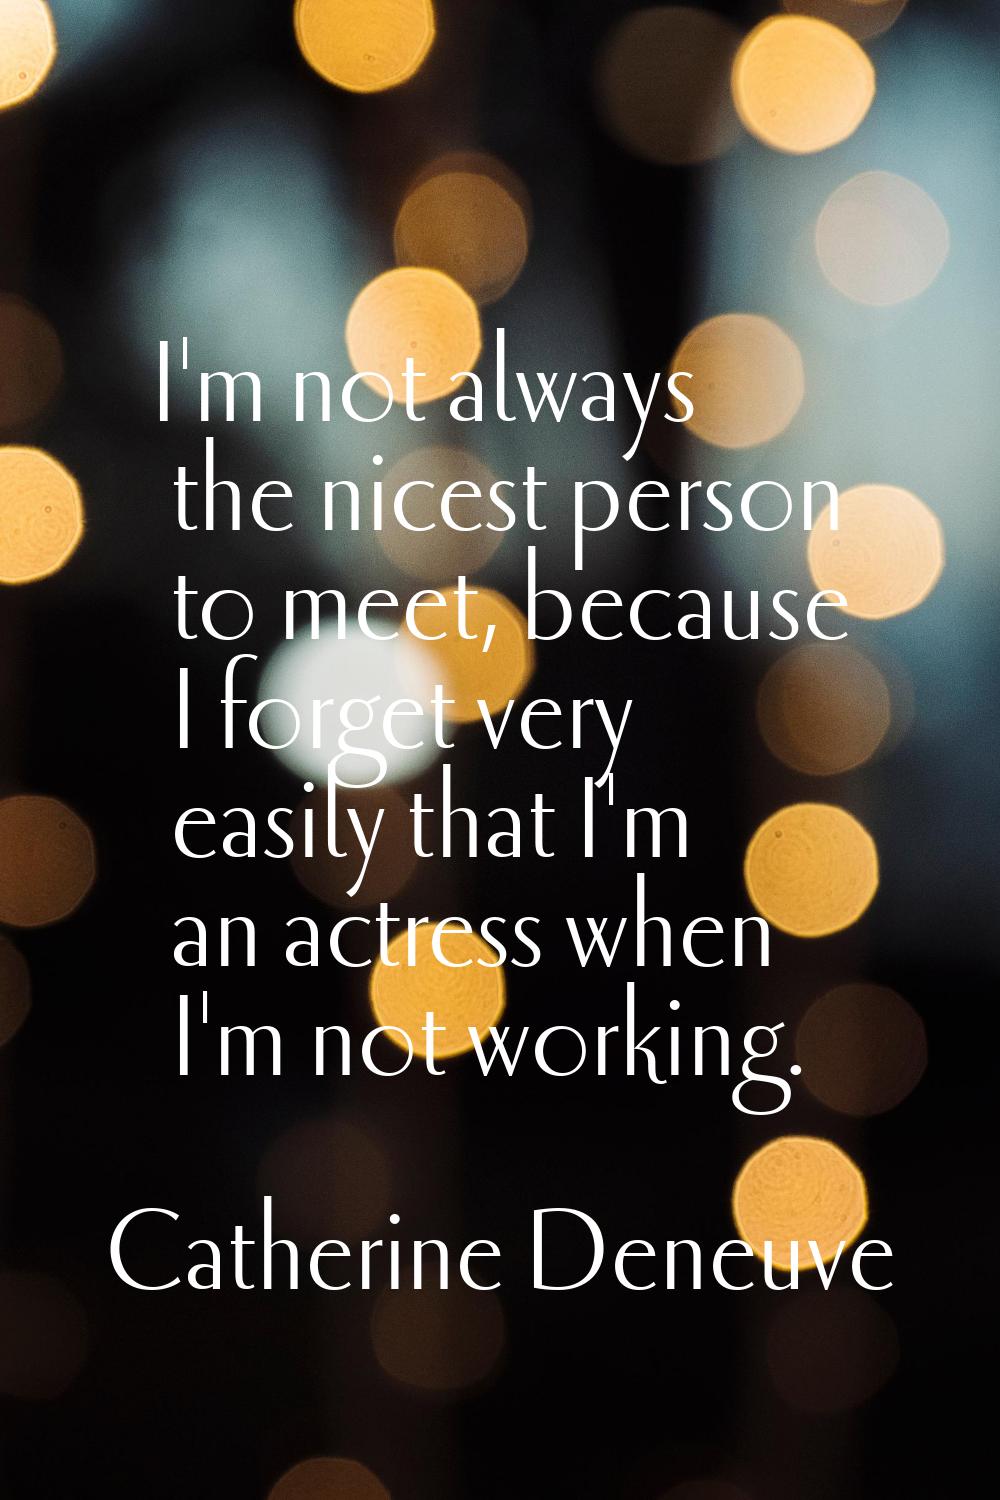 I'm not always the nicest person to meet, because I forget very easily that I'm an actress when I'm